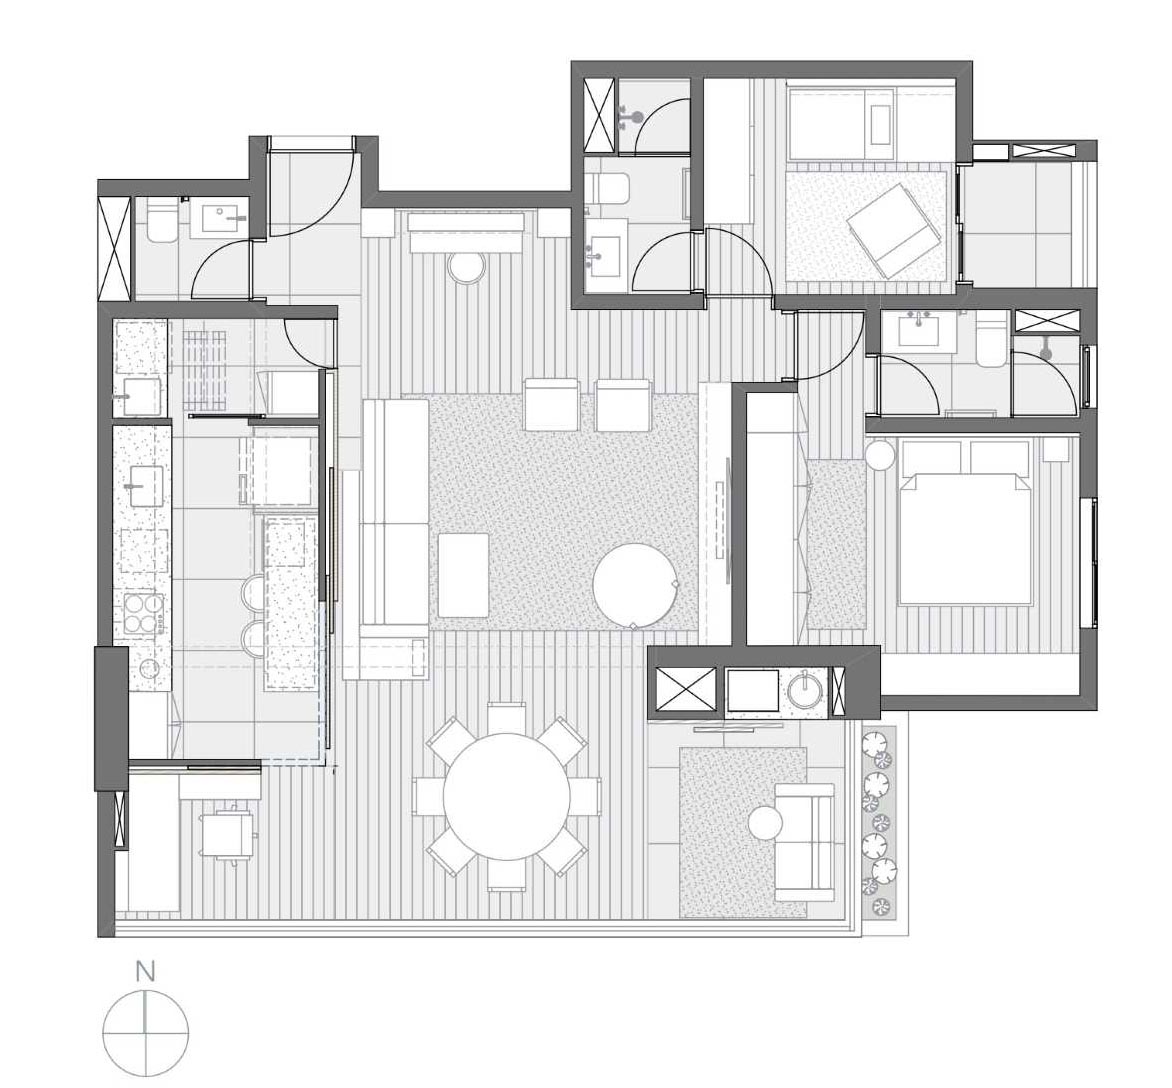 The floor plan of an apartment designed for a family.